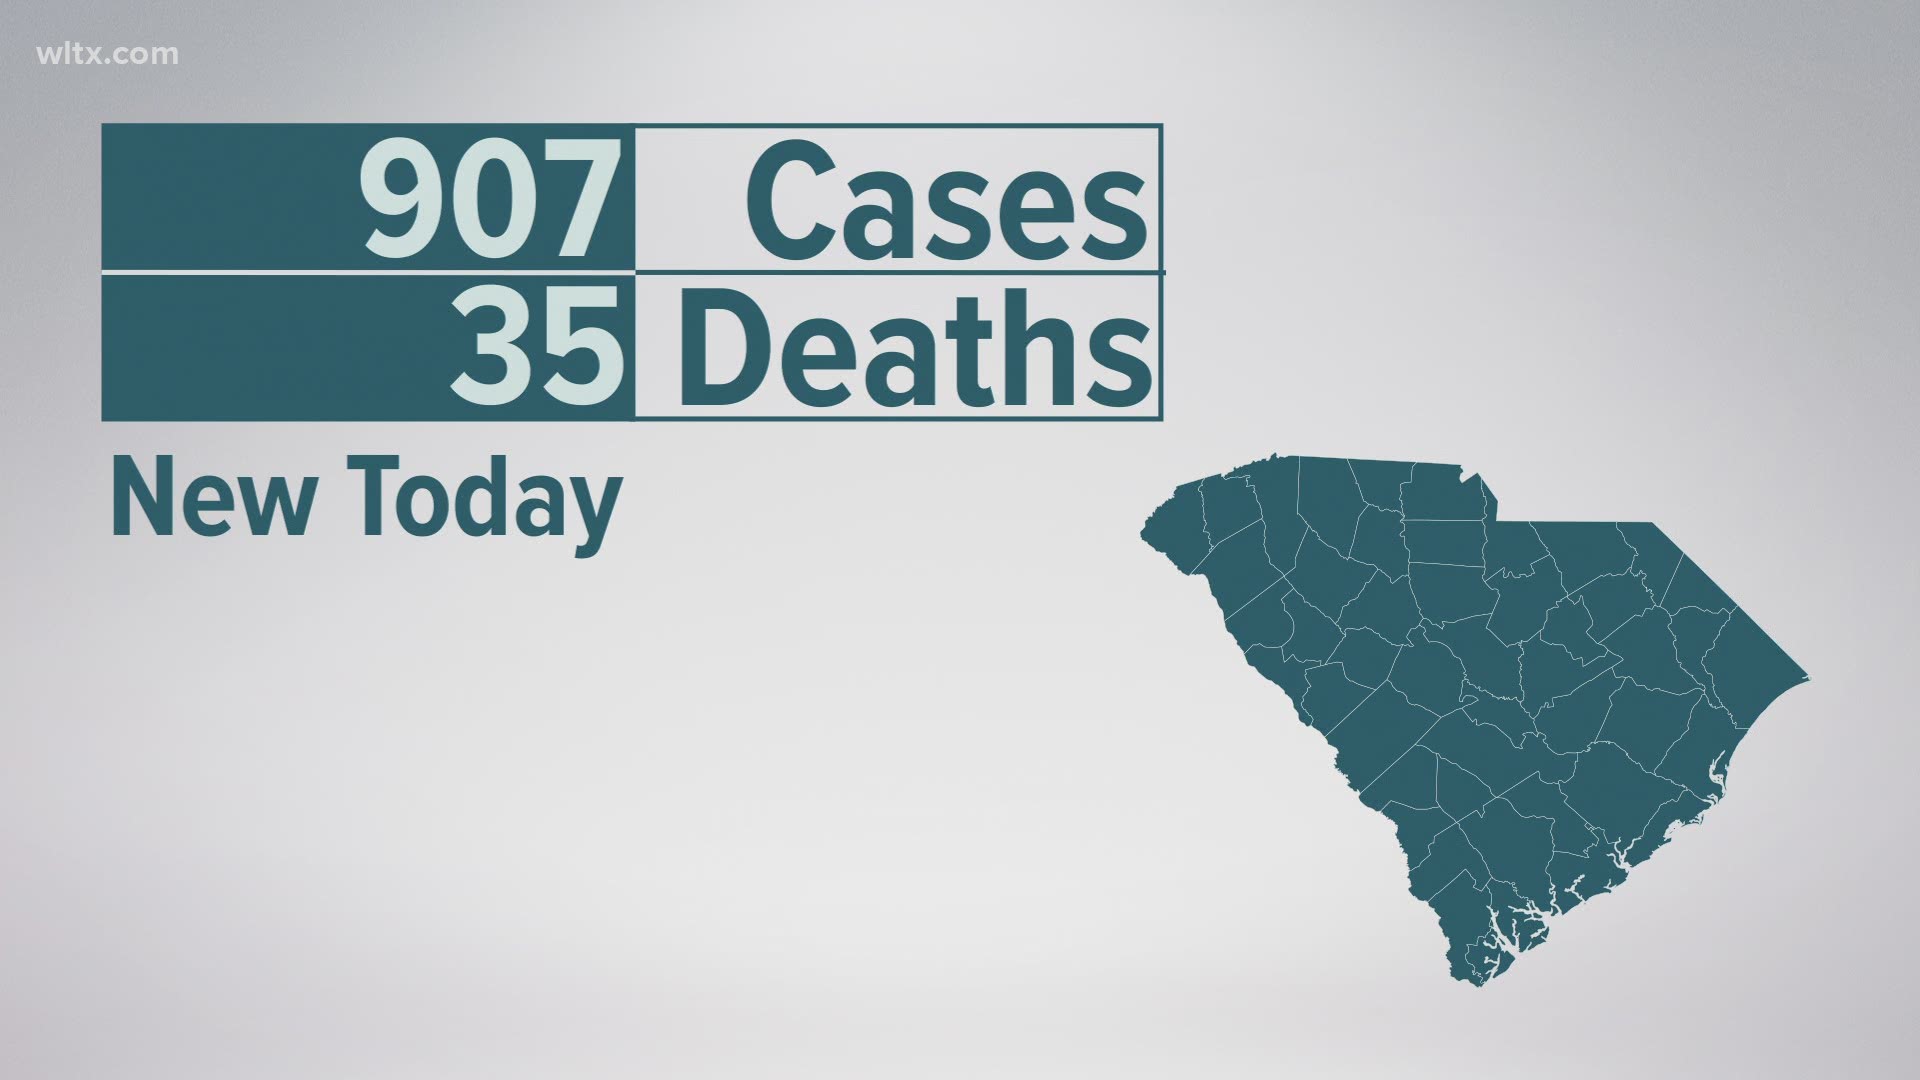 This brings the total number of confirmed cases to 103,051, probable cases to 858, confirmed deaths to 2,089, and 97 probable deaths